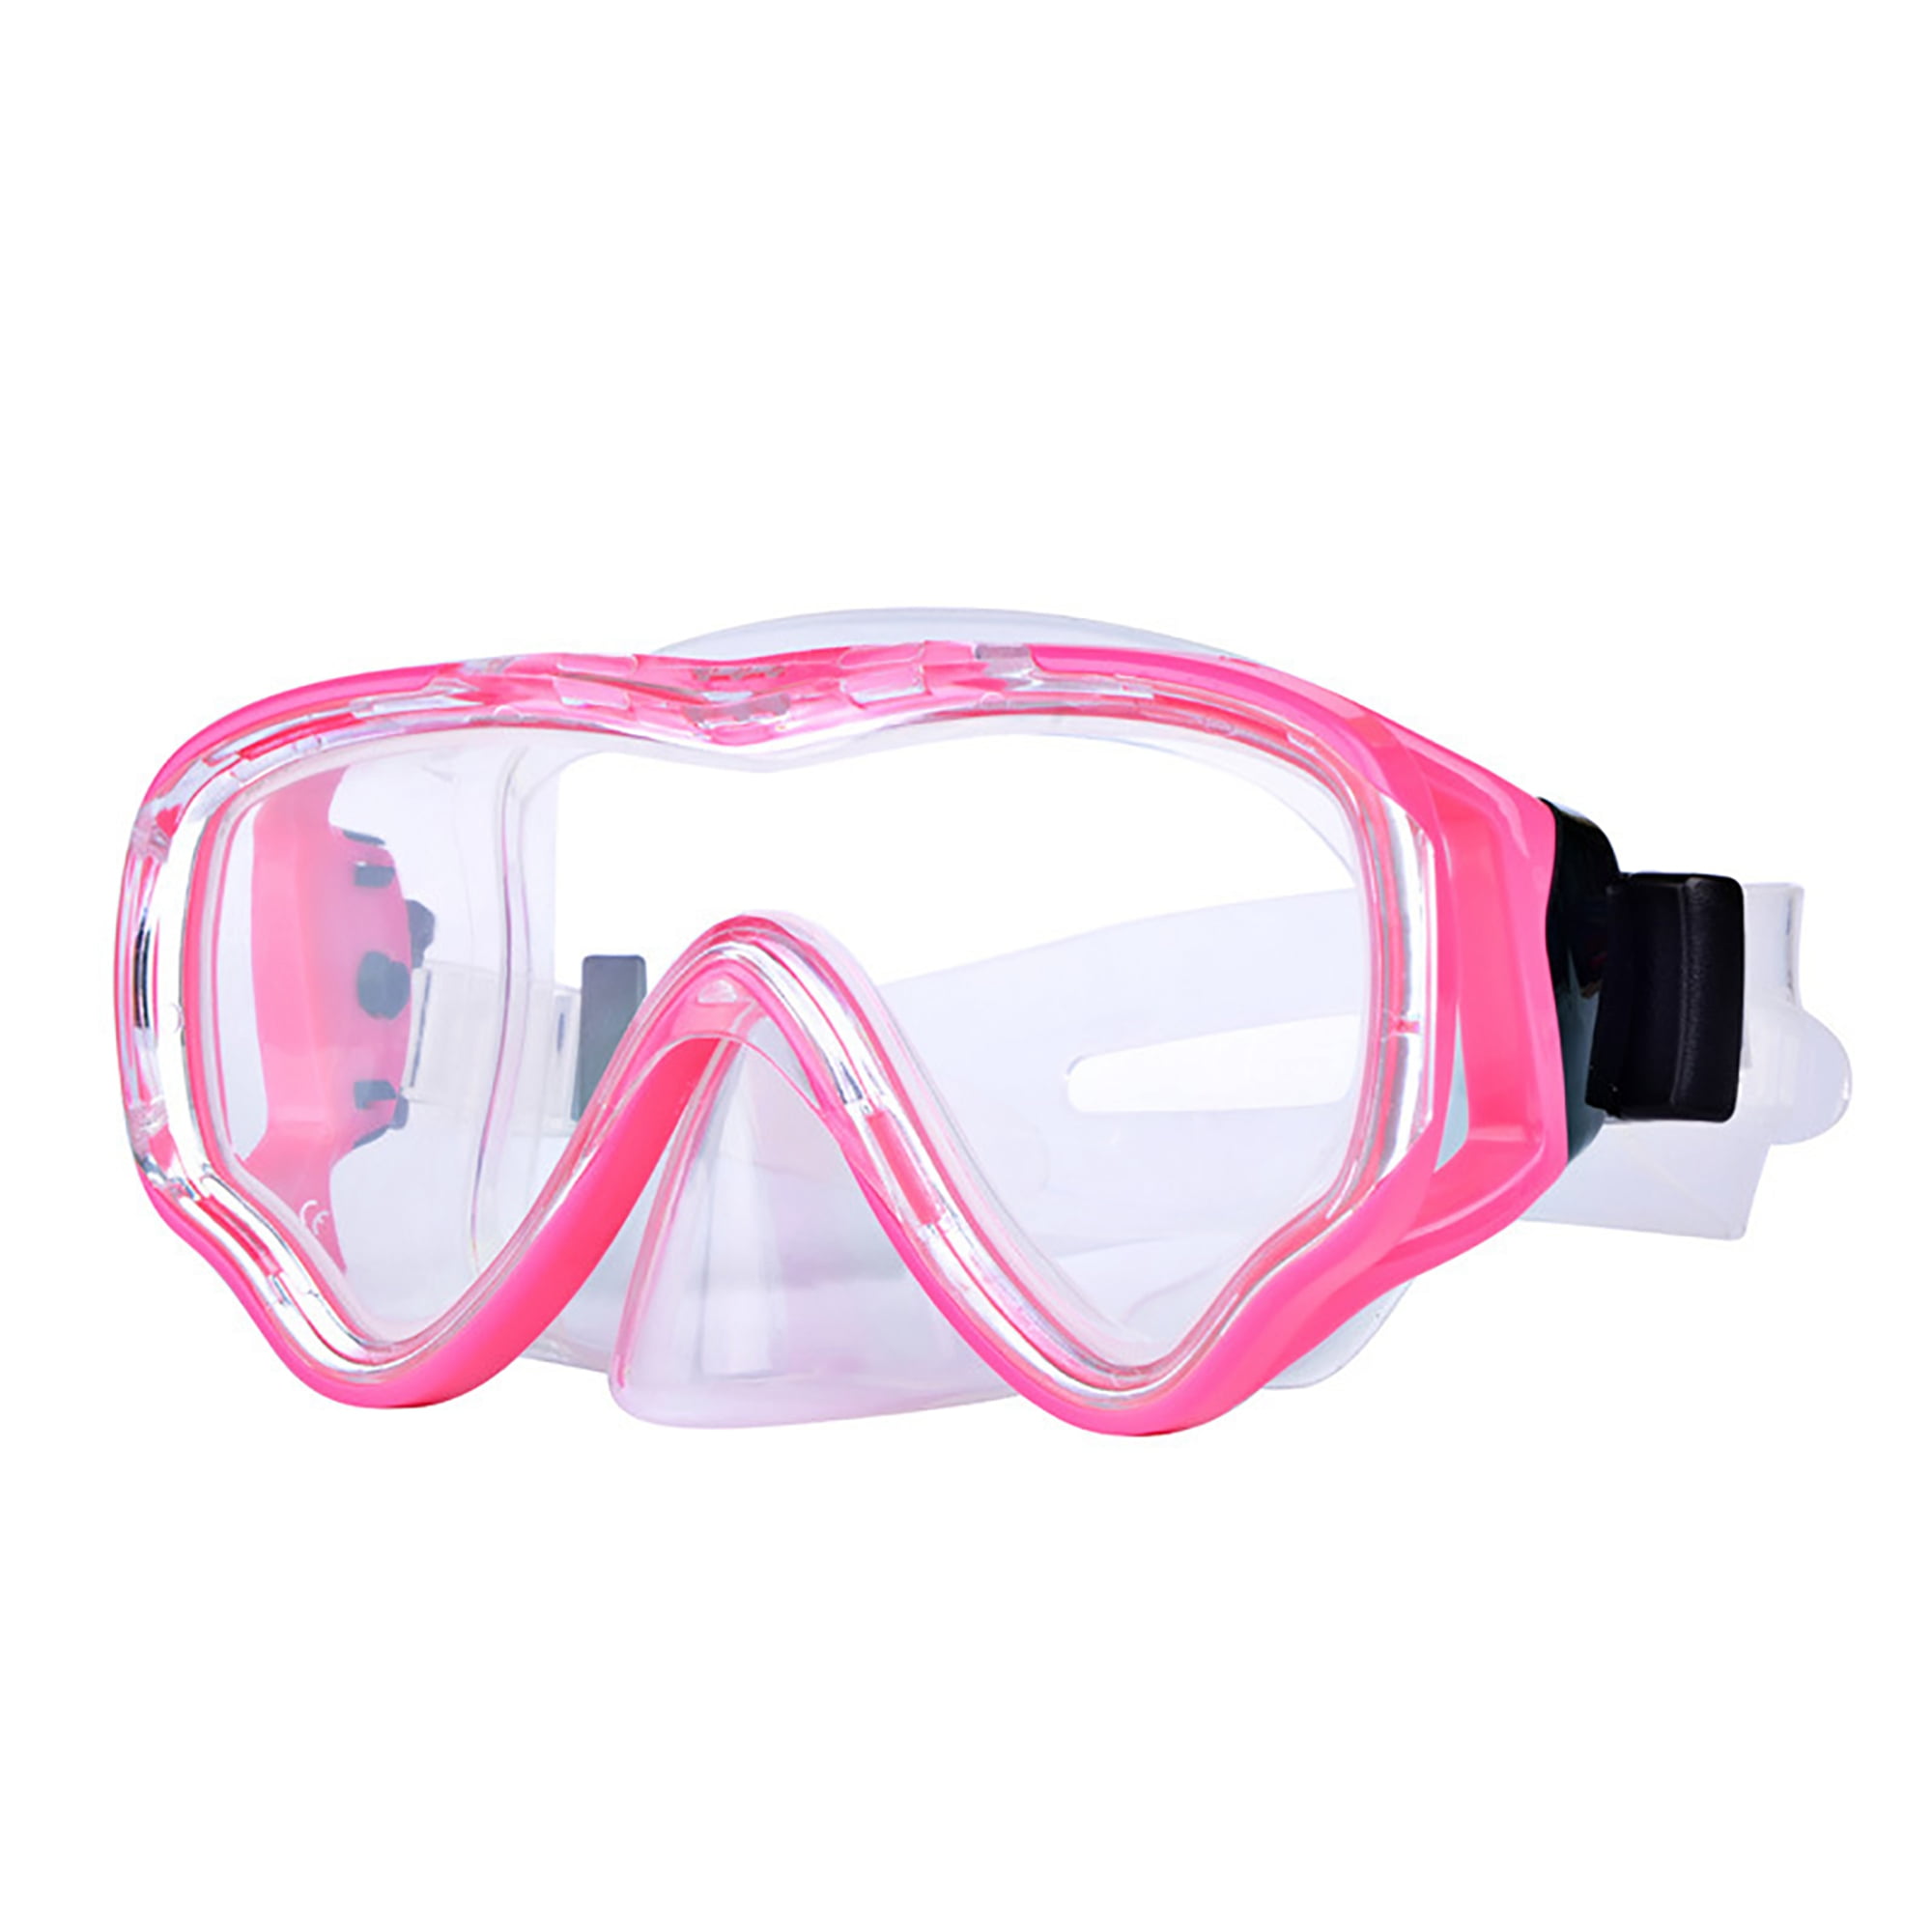 Anti Fog No Leaking UV Protection Swim Goggles AUGOLA Kids Swimming Goggles Nose Clip and Earplugs Large & Clear Vision Swimming Goggles for Kids 4-15 with Storage Case 